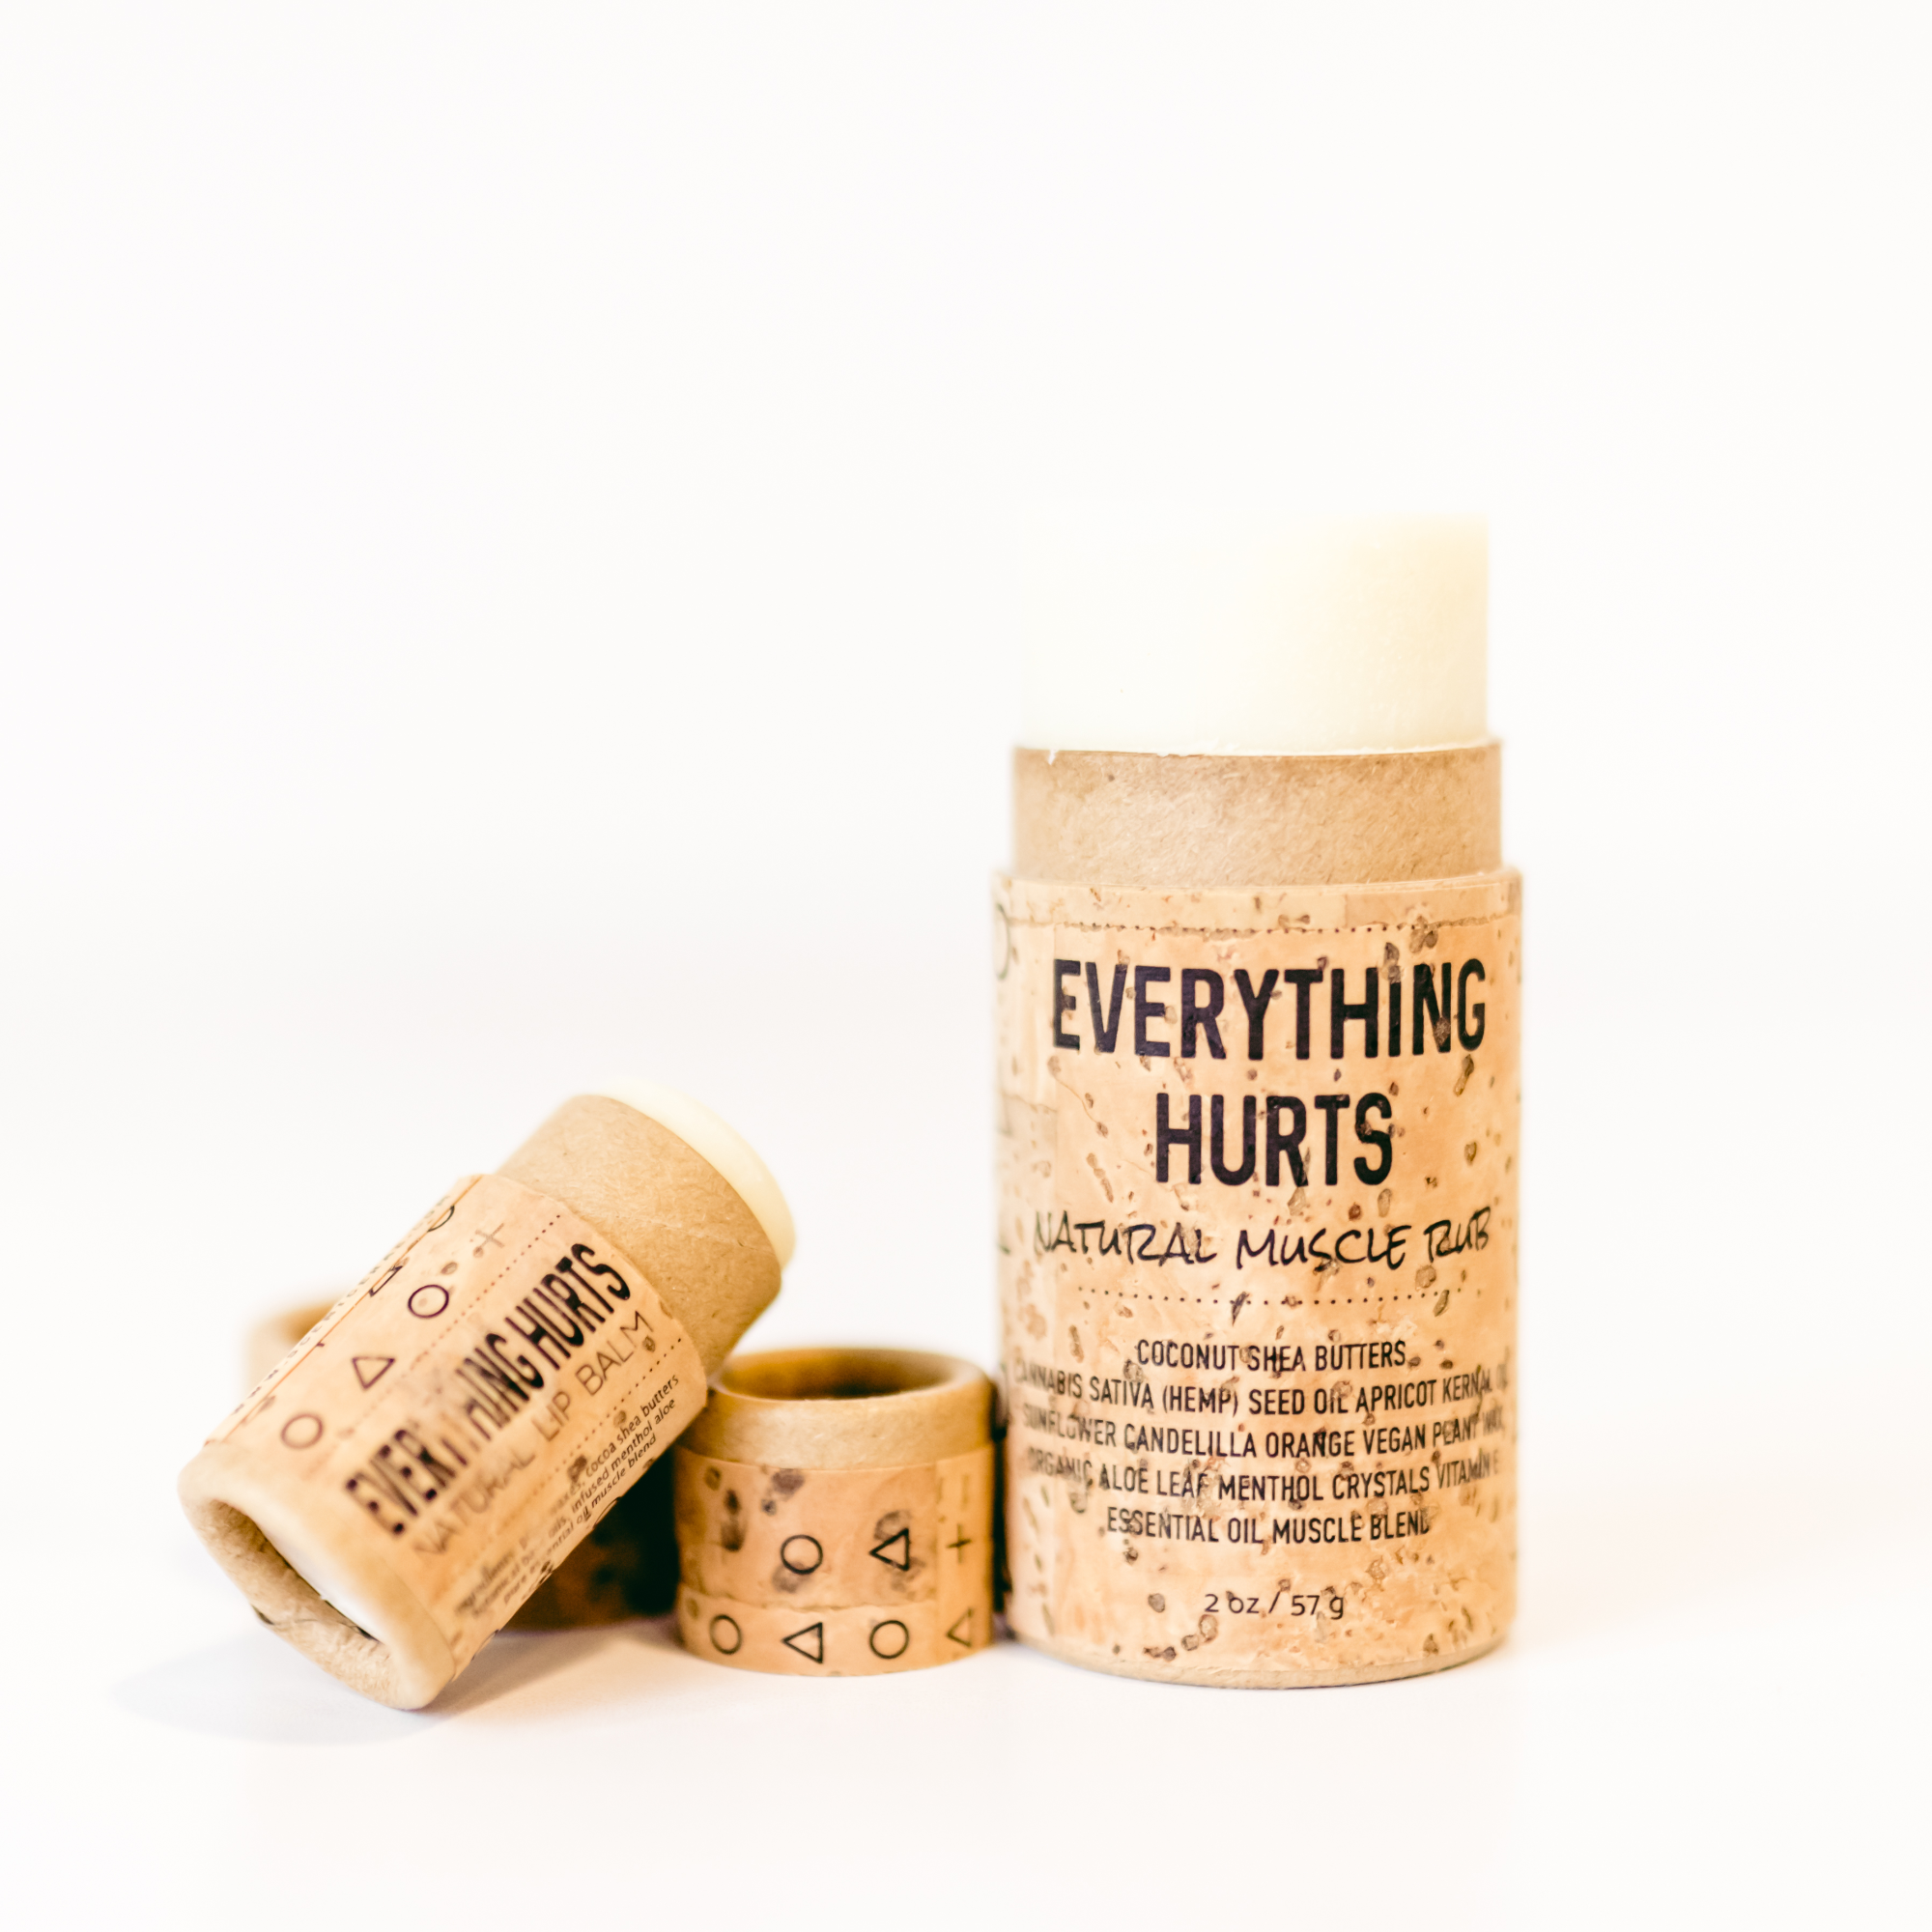 Scentcerae EVERYTHING HURTS Muscle Rub full size push up